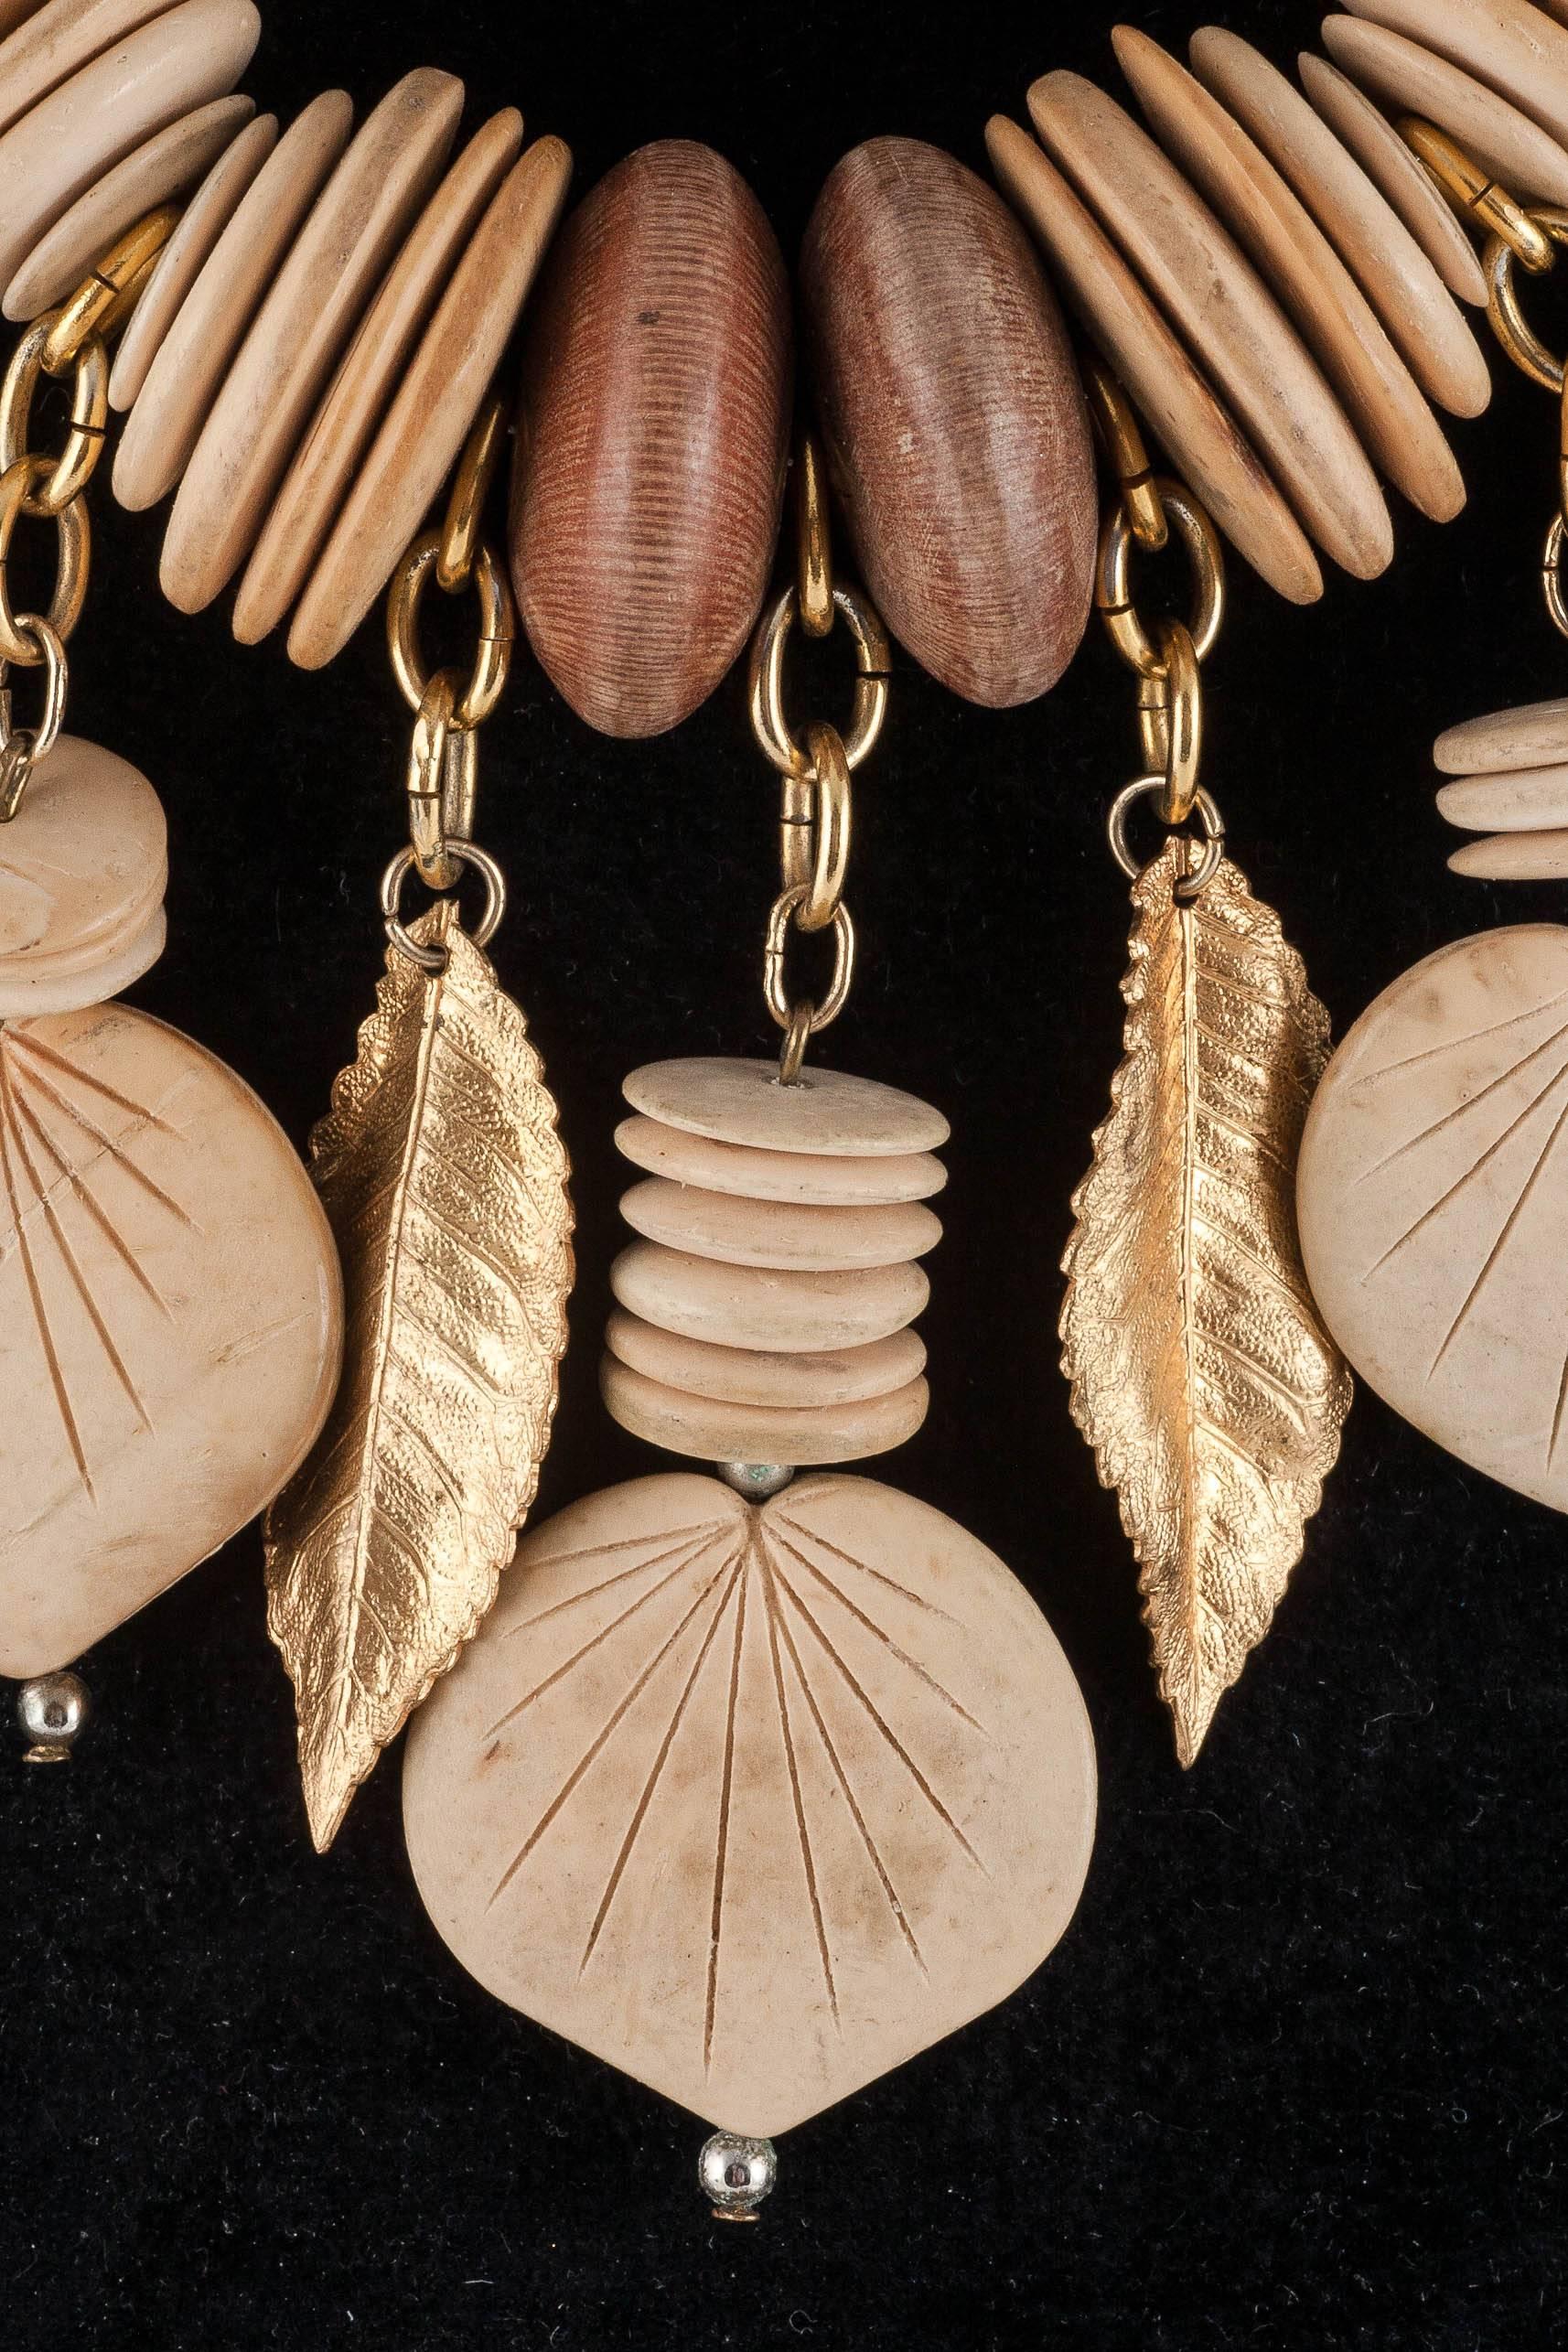 A light, fun necklace made of pale and darker wood discs with suspended gilt leaves, just right for holiday dressing. Bought in the South of France and no doubt worn with macrame and cheese cloth, this has a lovely bohemian look but also peaks of